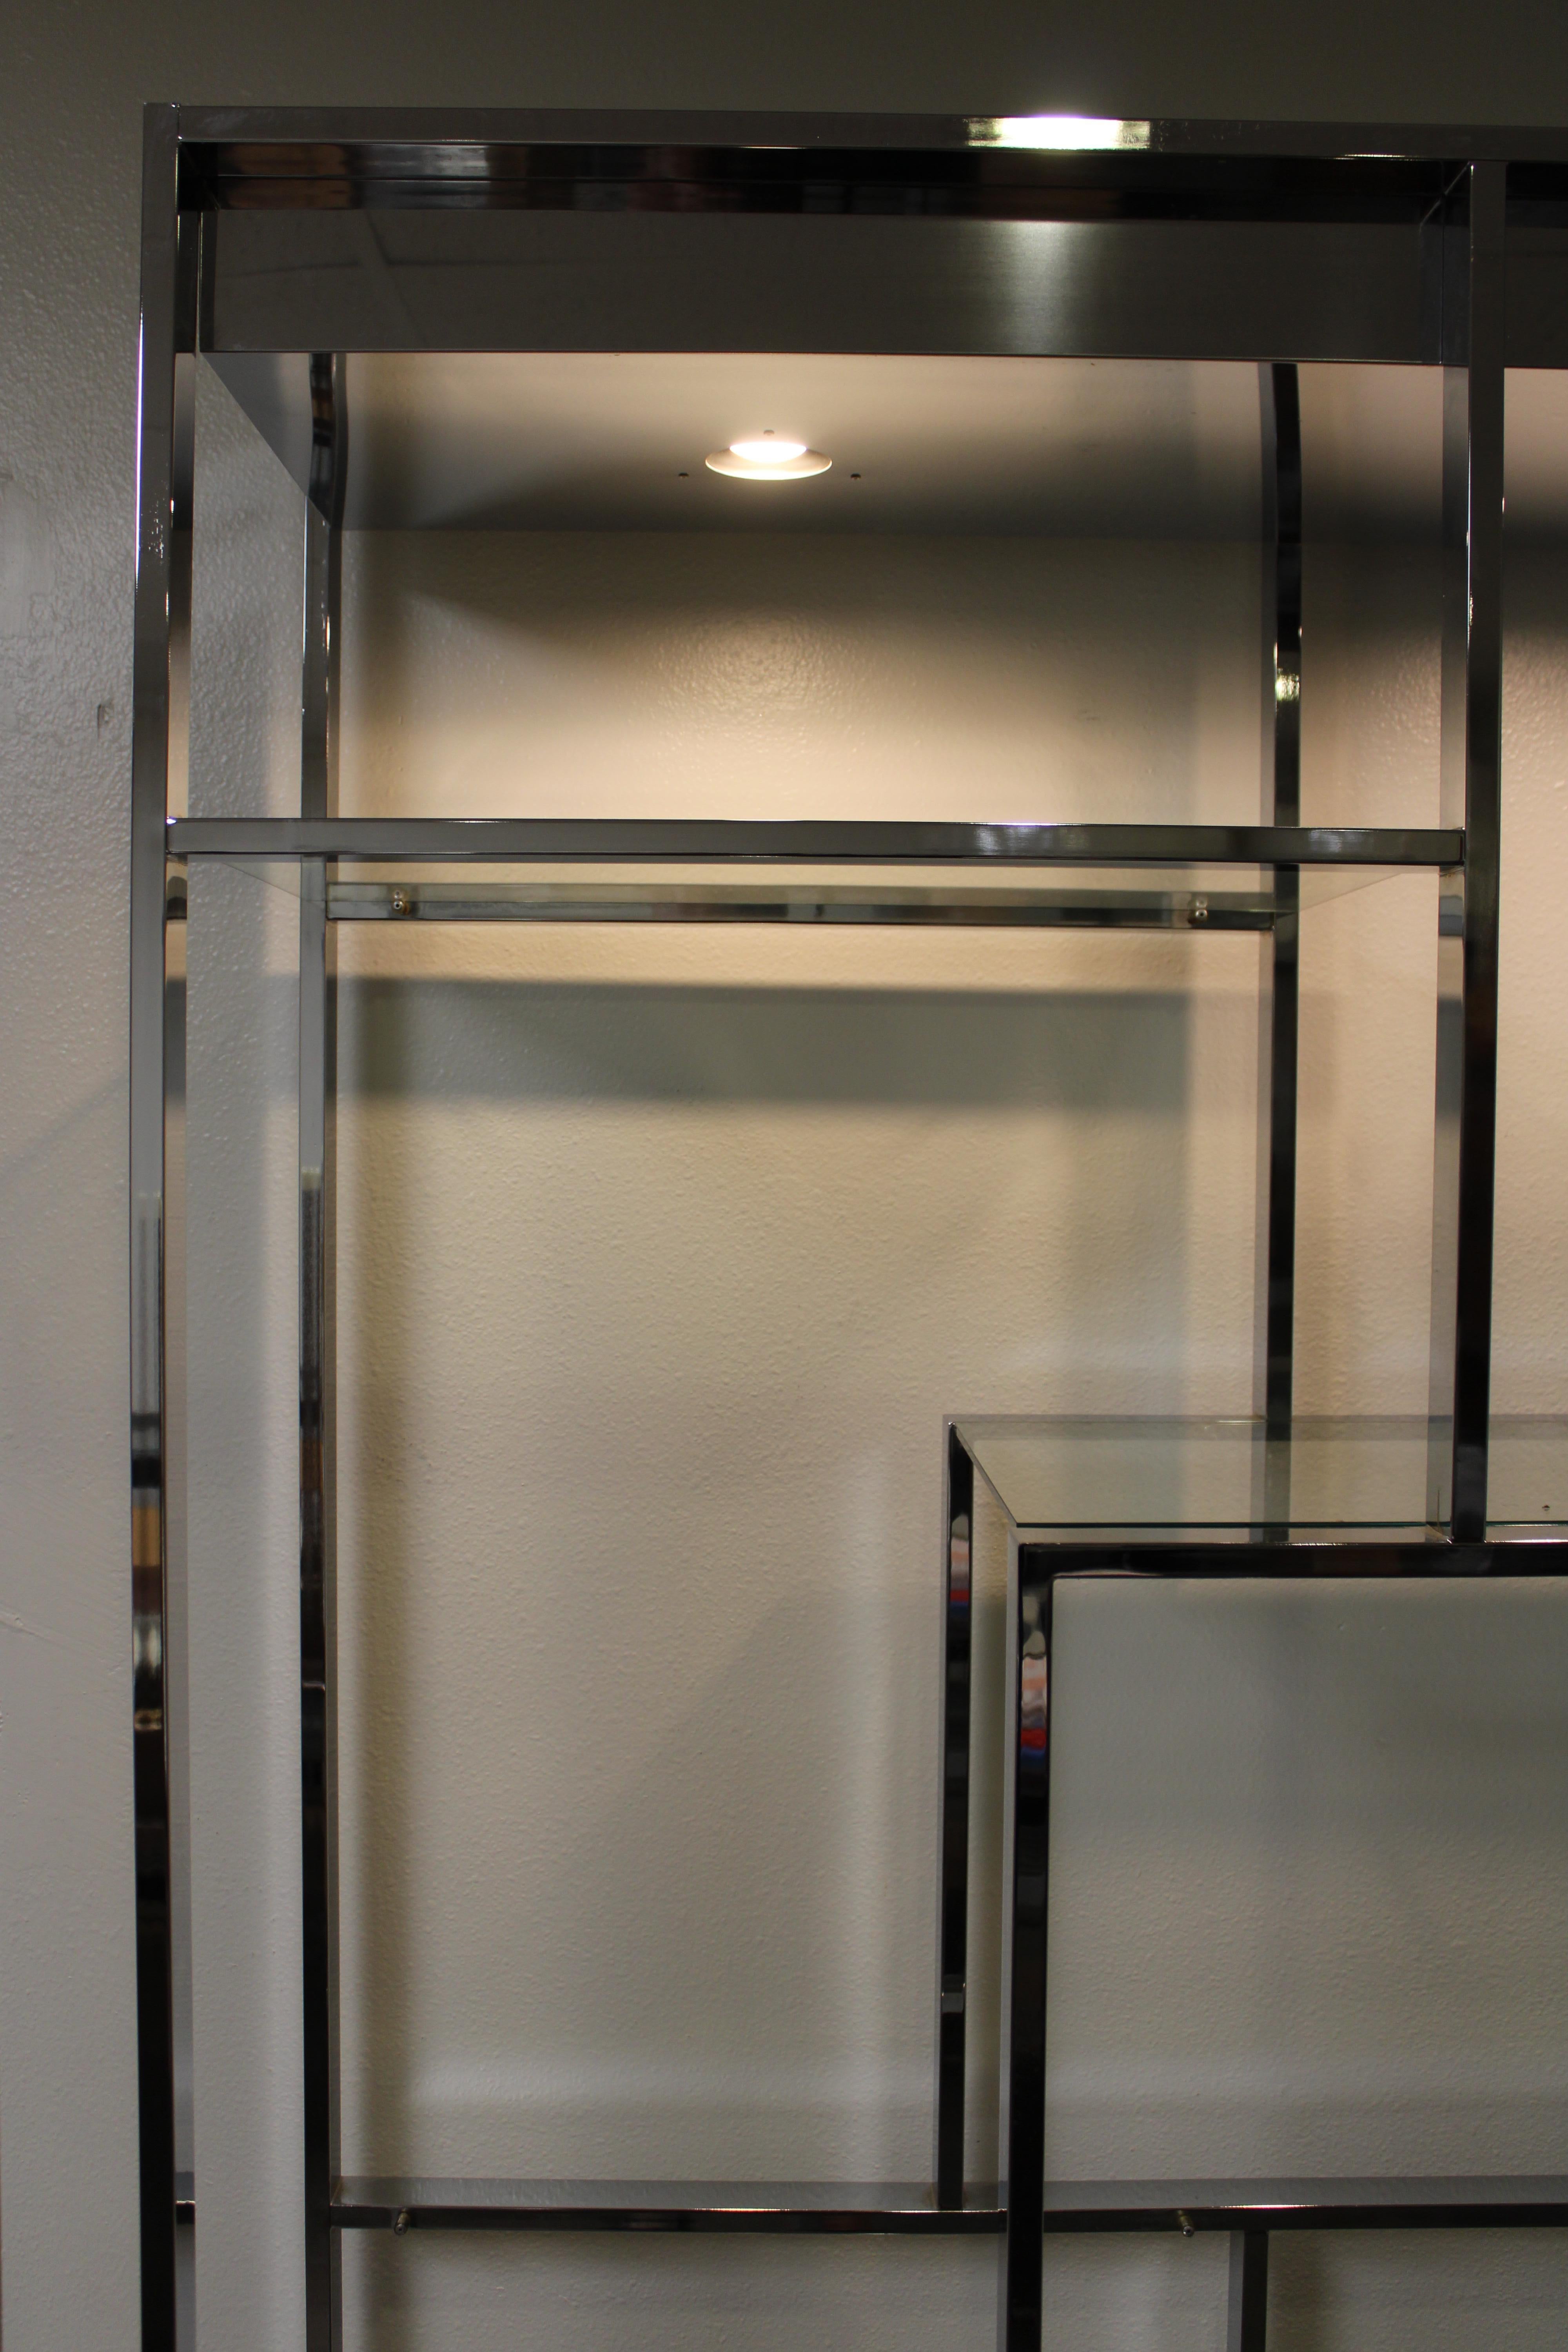 Design Institute of America (DIA) chrome plated steel Etagere with new tempered glass shelves.  Etagere has label which is dated 1983.  Chrome is immaculate and both light fixtures work.  Top of etagere contains a glass shelf for additional display.